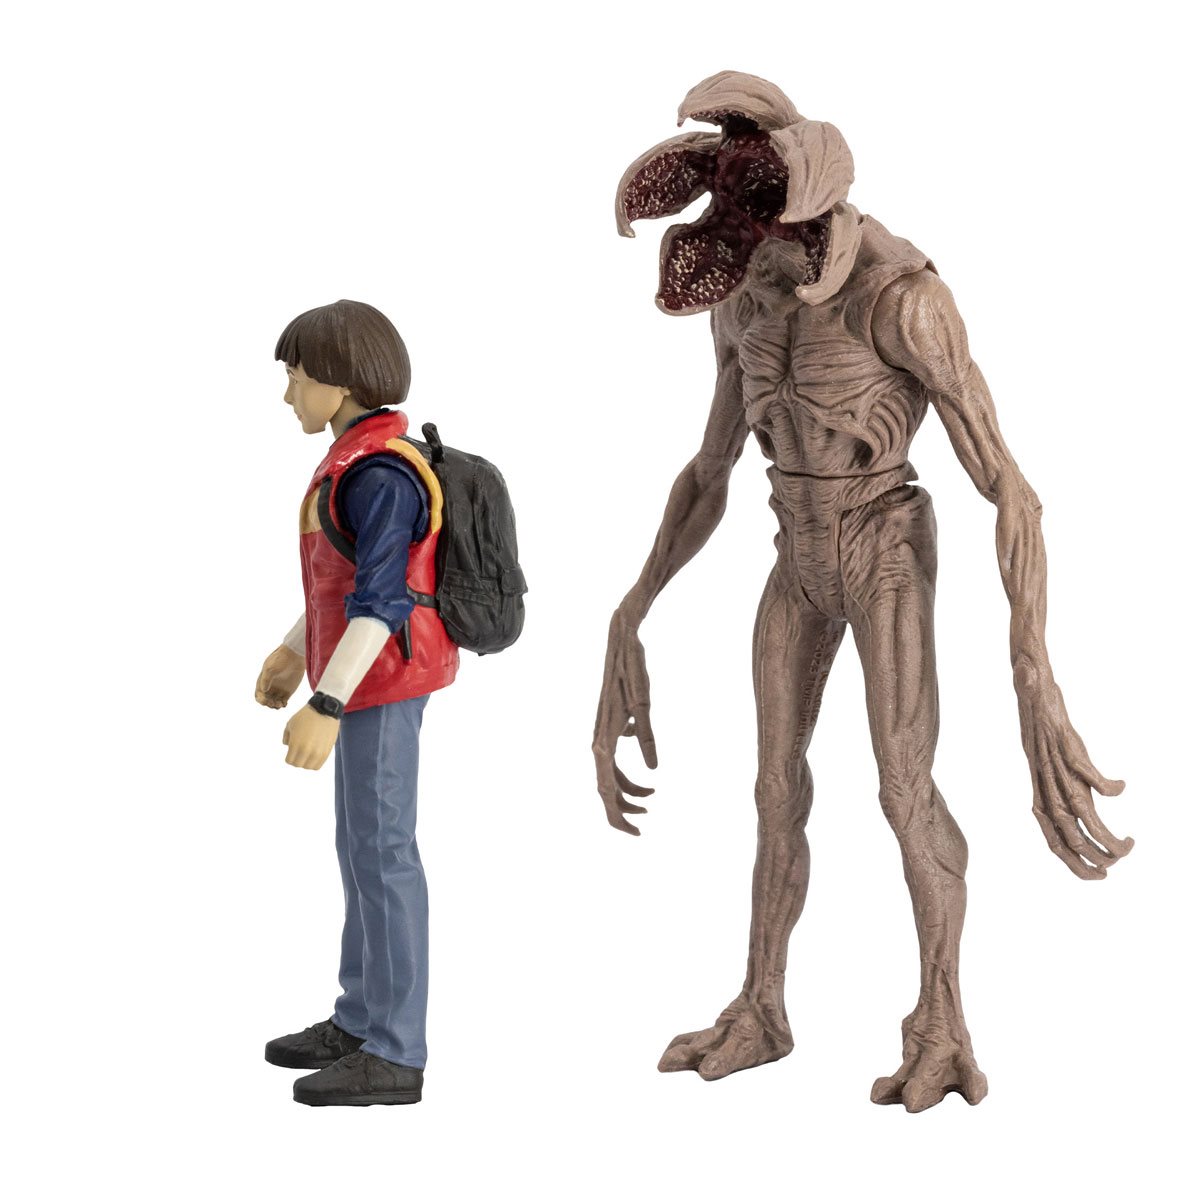 1/6 Sixth Scale Figure: Will Byers Stranger Things 1/6 Action